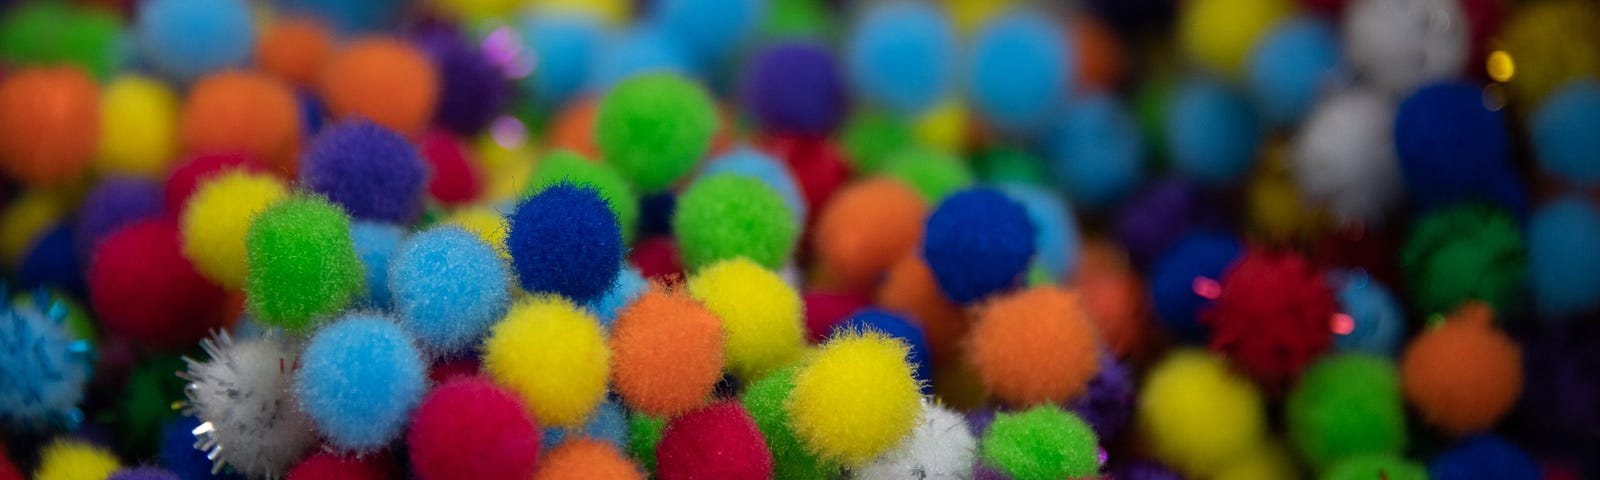 little fuzzy balls of many colors, including blue, turquoise, red, pink, white, yellow, and green